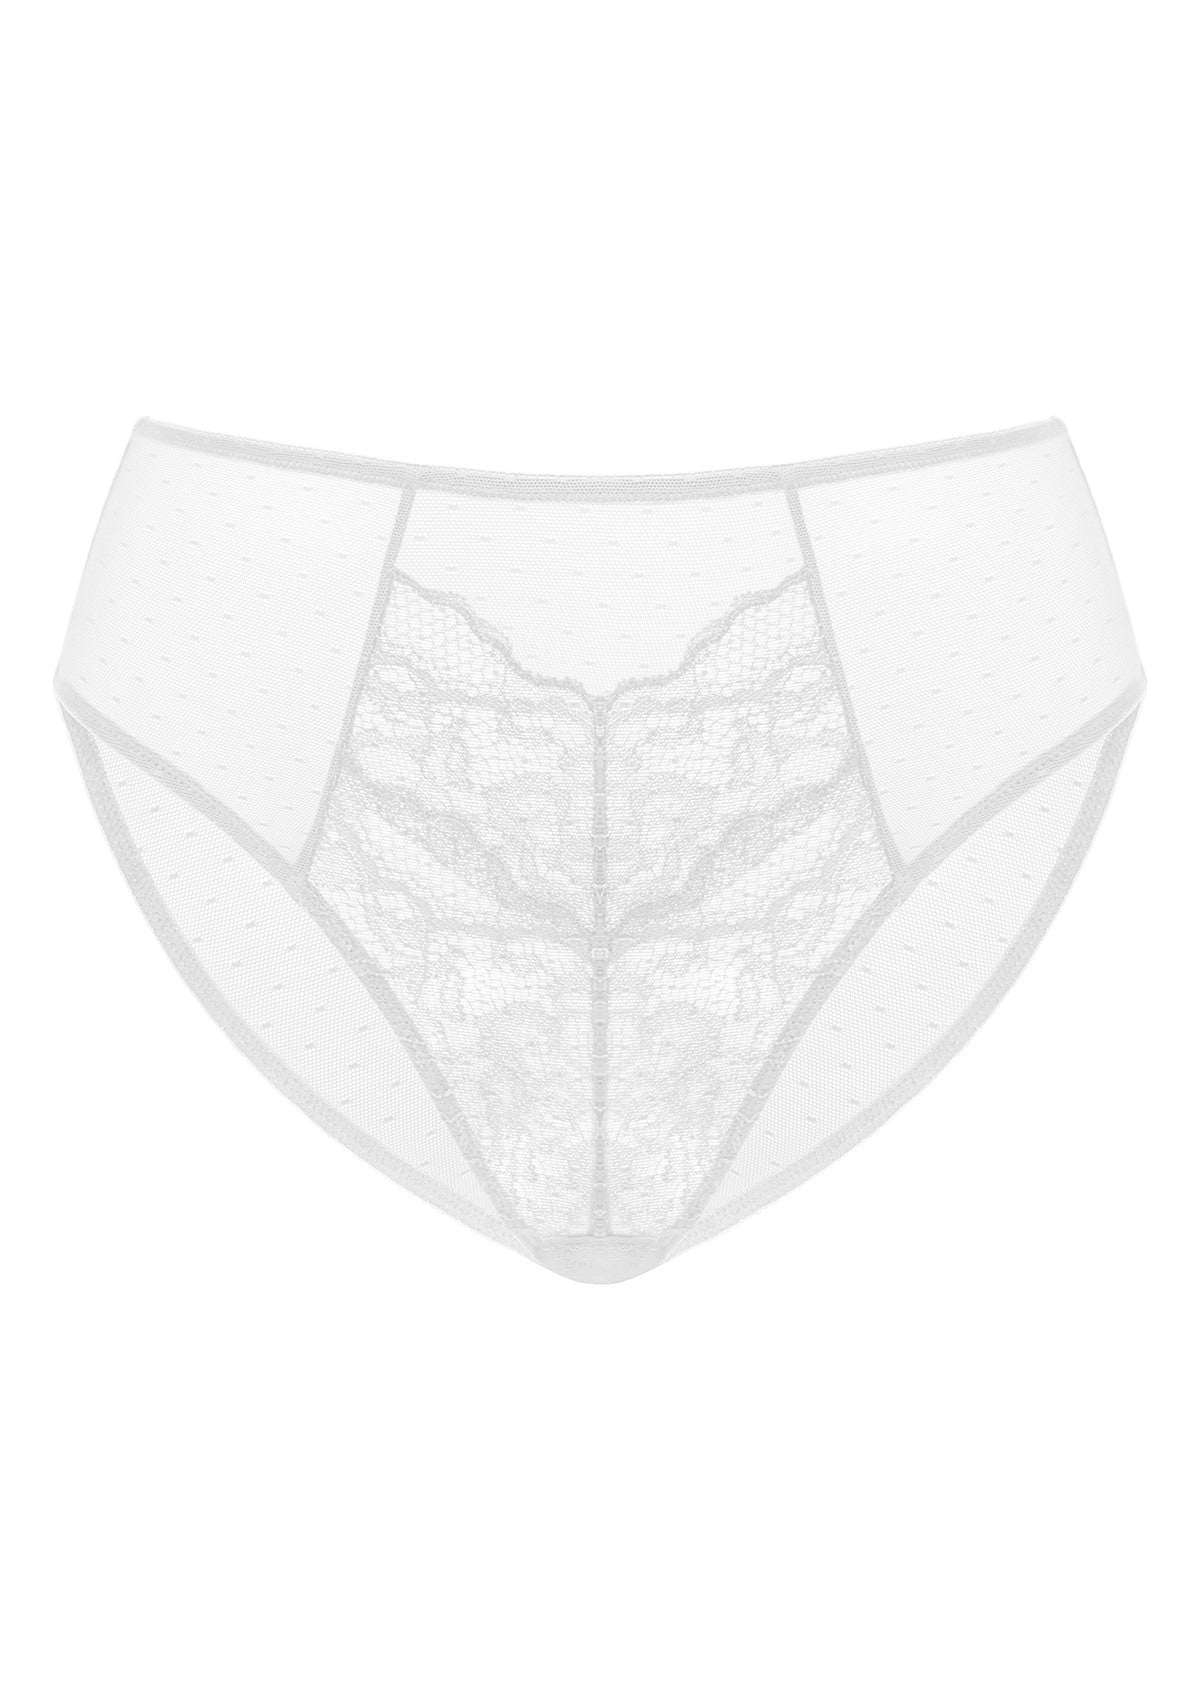 HSIA Enchante High-Rise Floral Lacy Panty-Comfort In Style - XXXL / White